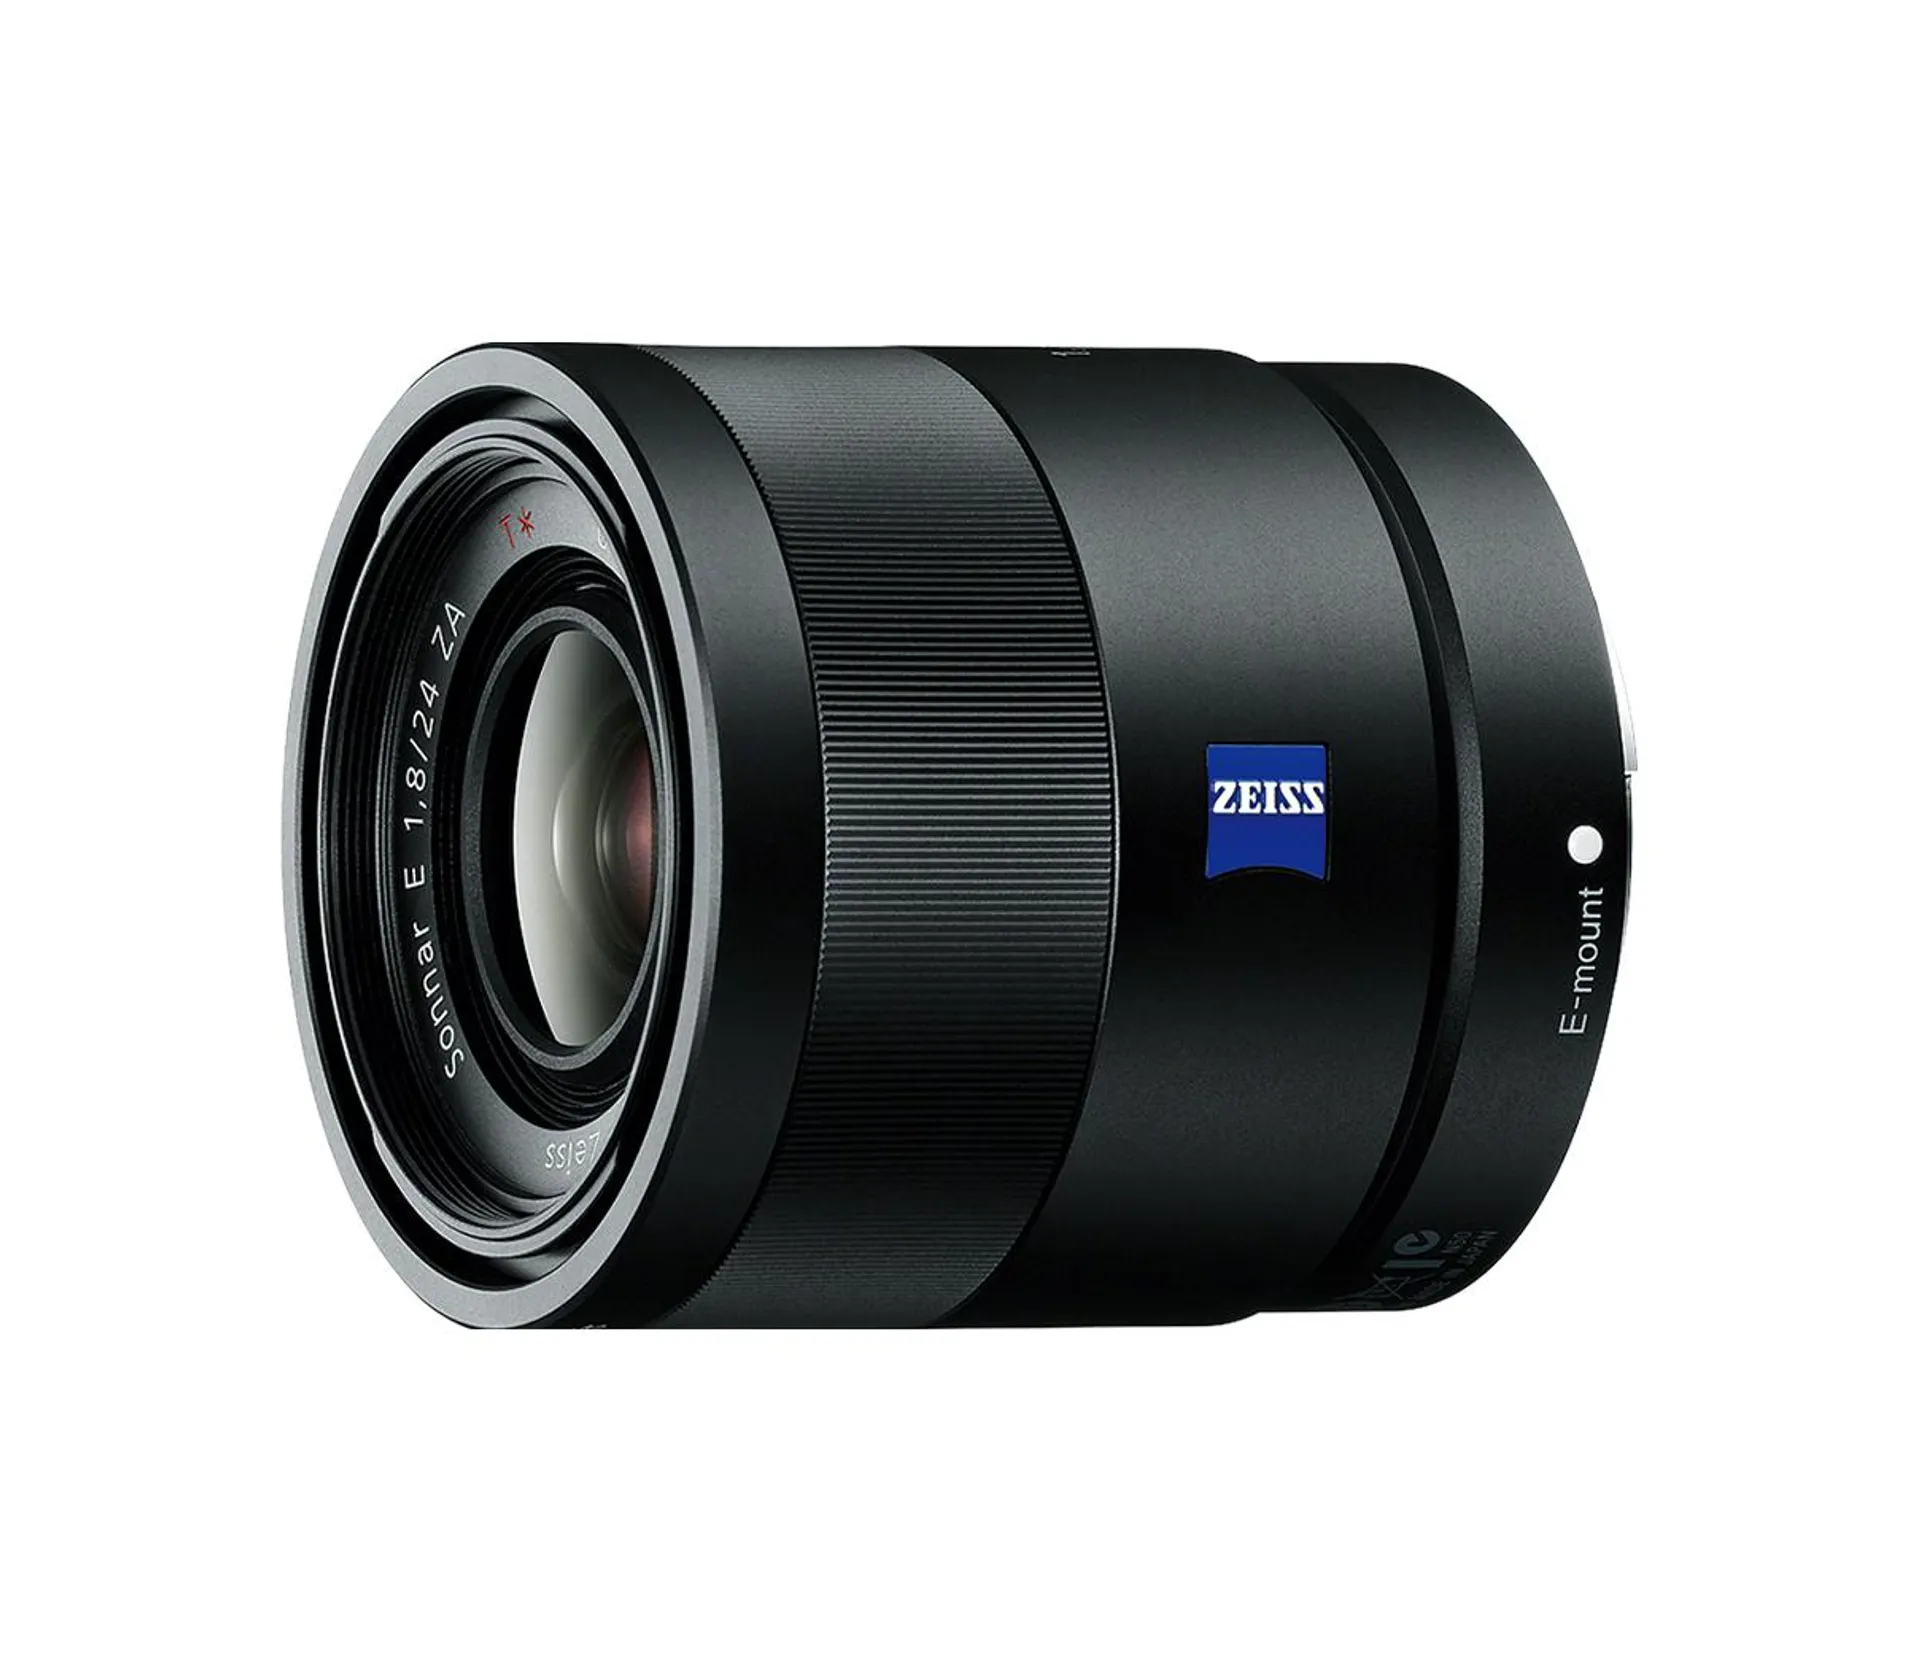 Sonnar E 24mm F1.8 ZA APS-C Wide-angle Prime ZEISS Lens